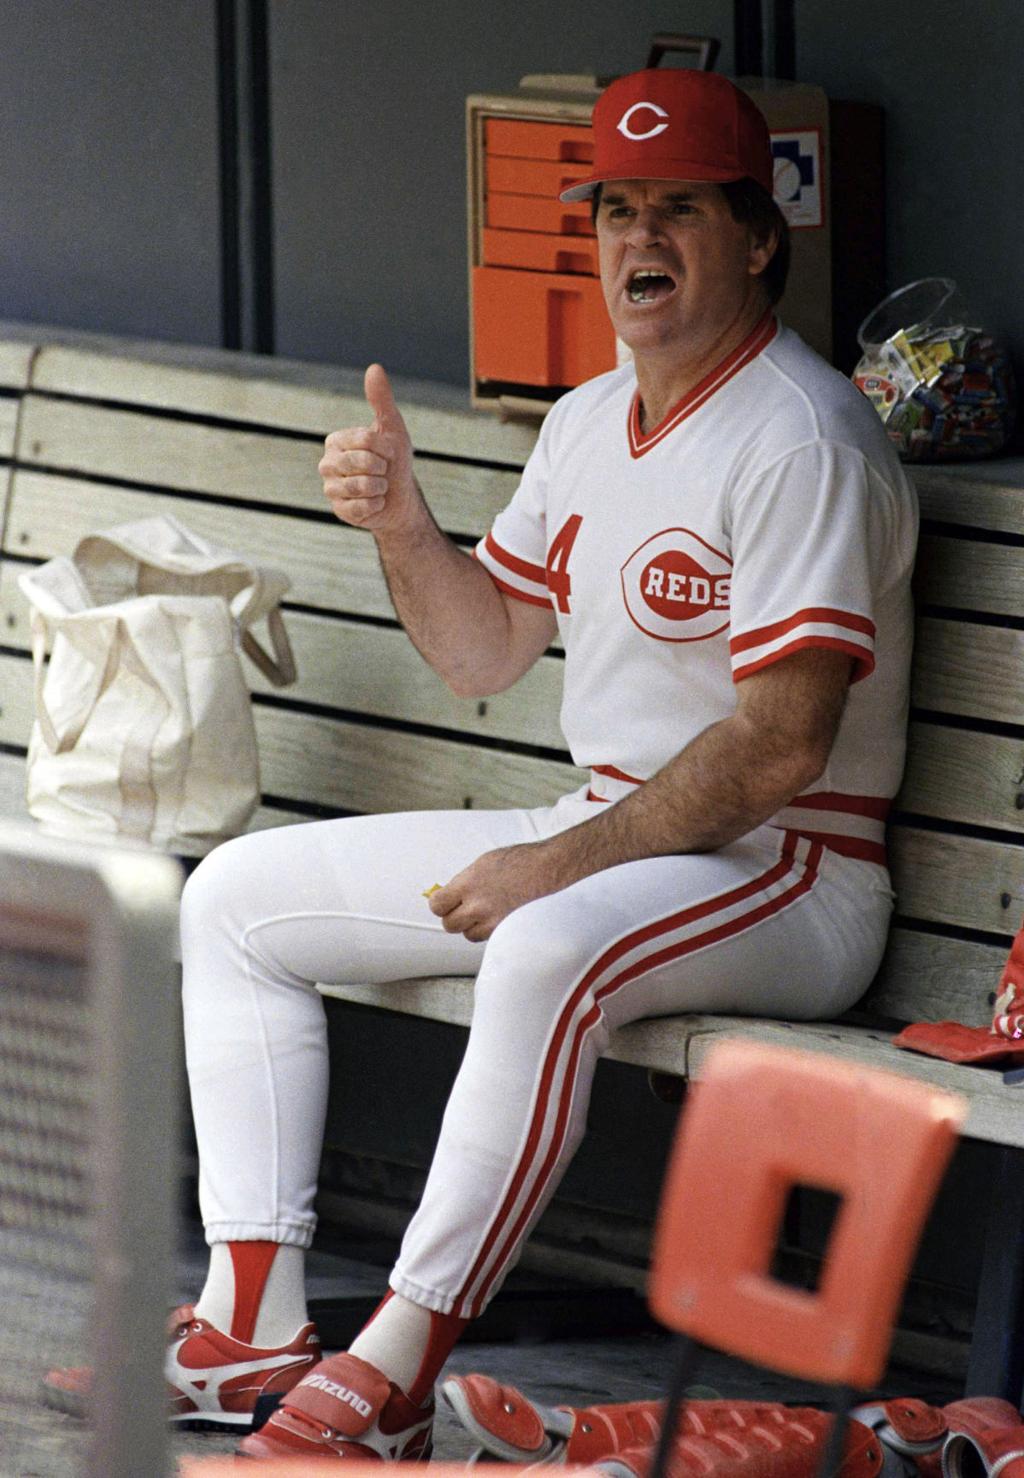 Why Nobody's Sure Which Day Pete Rose Broke Baseball's Hit Record